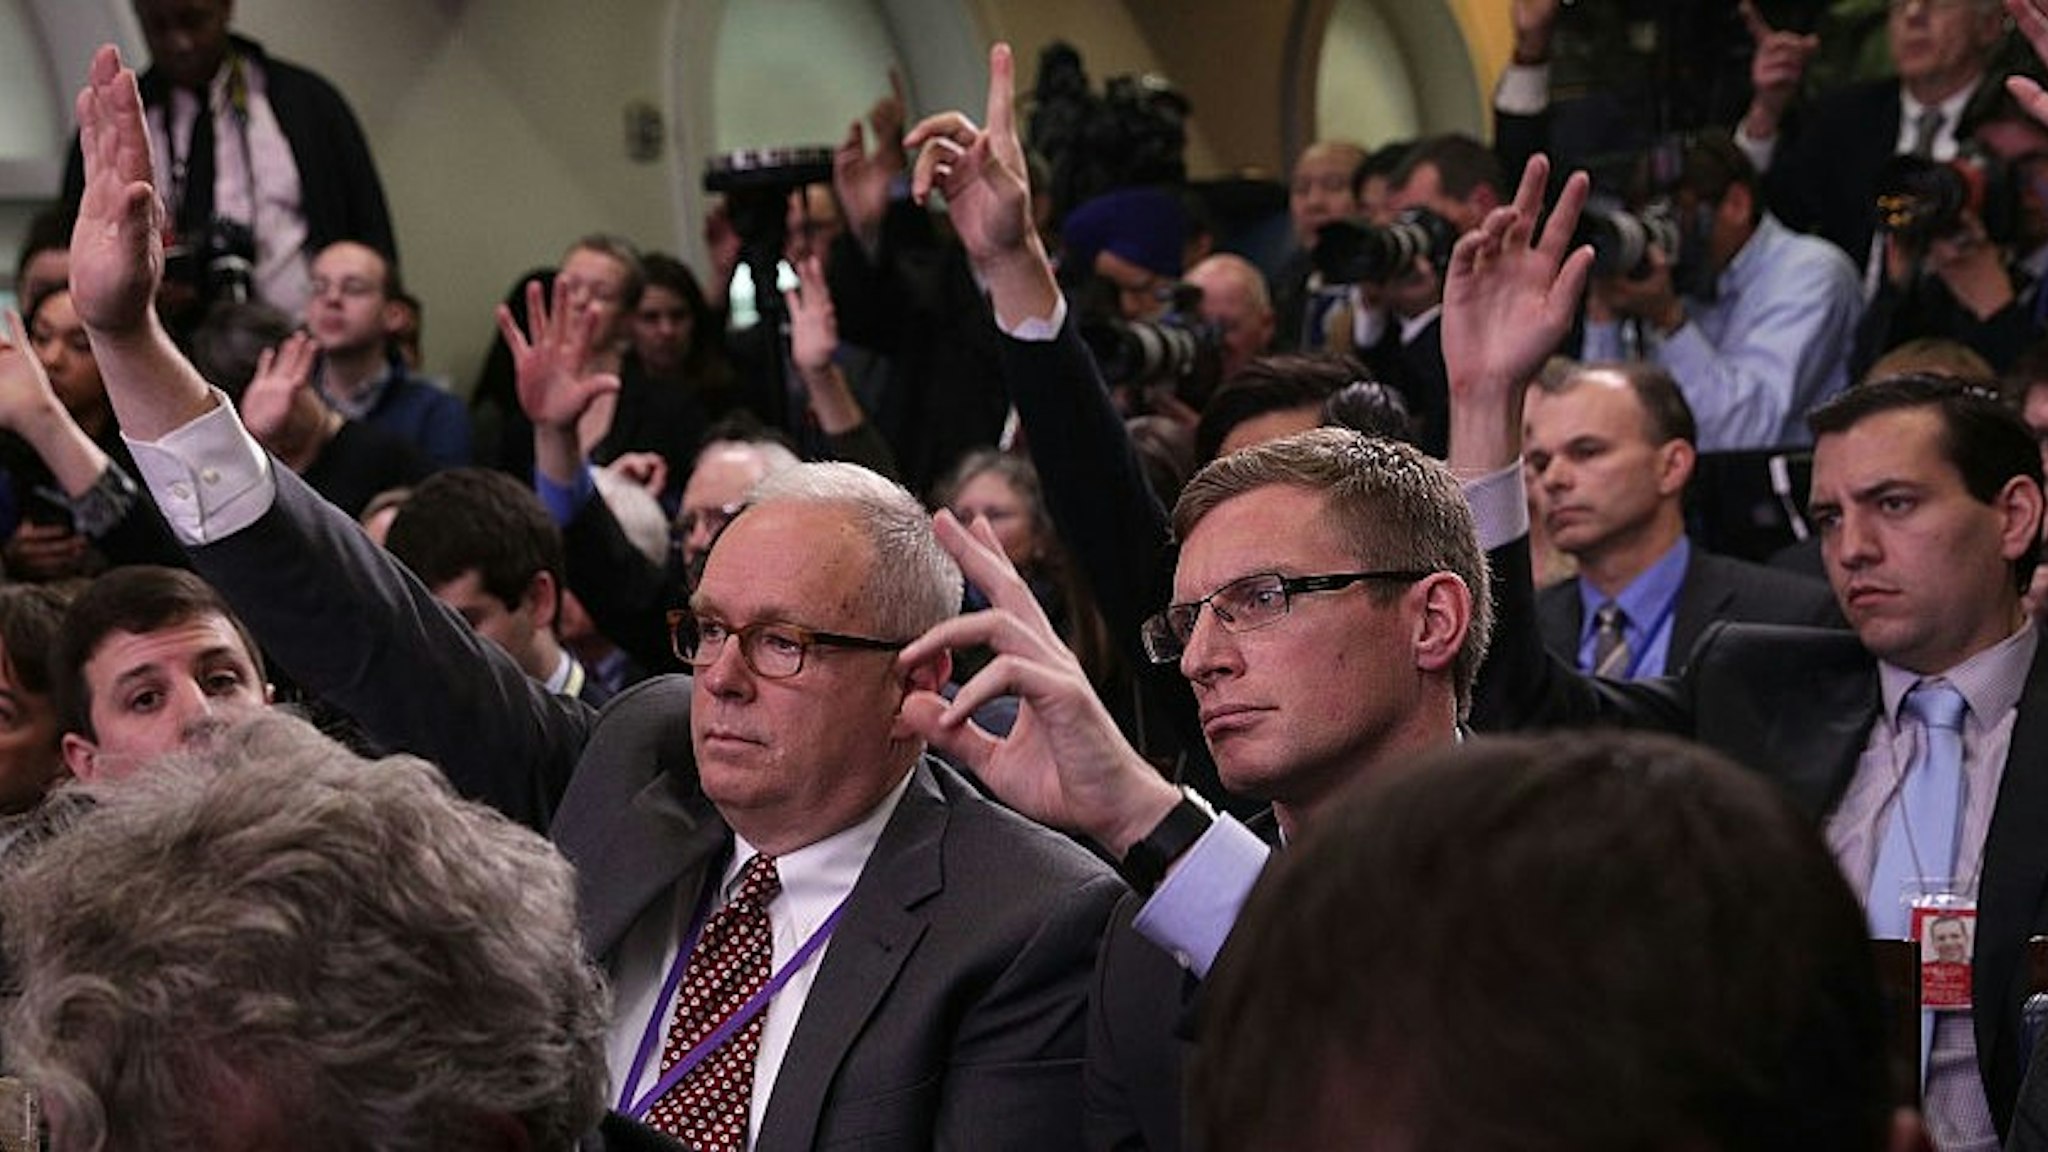 WASHINGTON, DC - JANUARY 23: Members of the media raise their hands to ask questions during a daily briefing conducted by White House Press Secretary Sean Spicer at the James Brady Press Briefing Room of the White House January 23, 2017 in Washington, DC. Spicer conducted his first official White House daily briefing to take questions from the members of the White House press corps. (Photo by